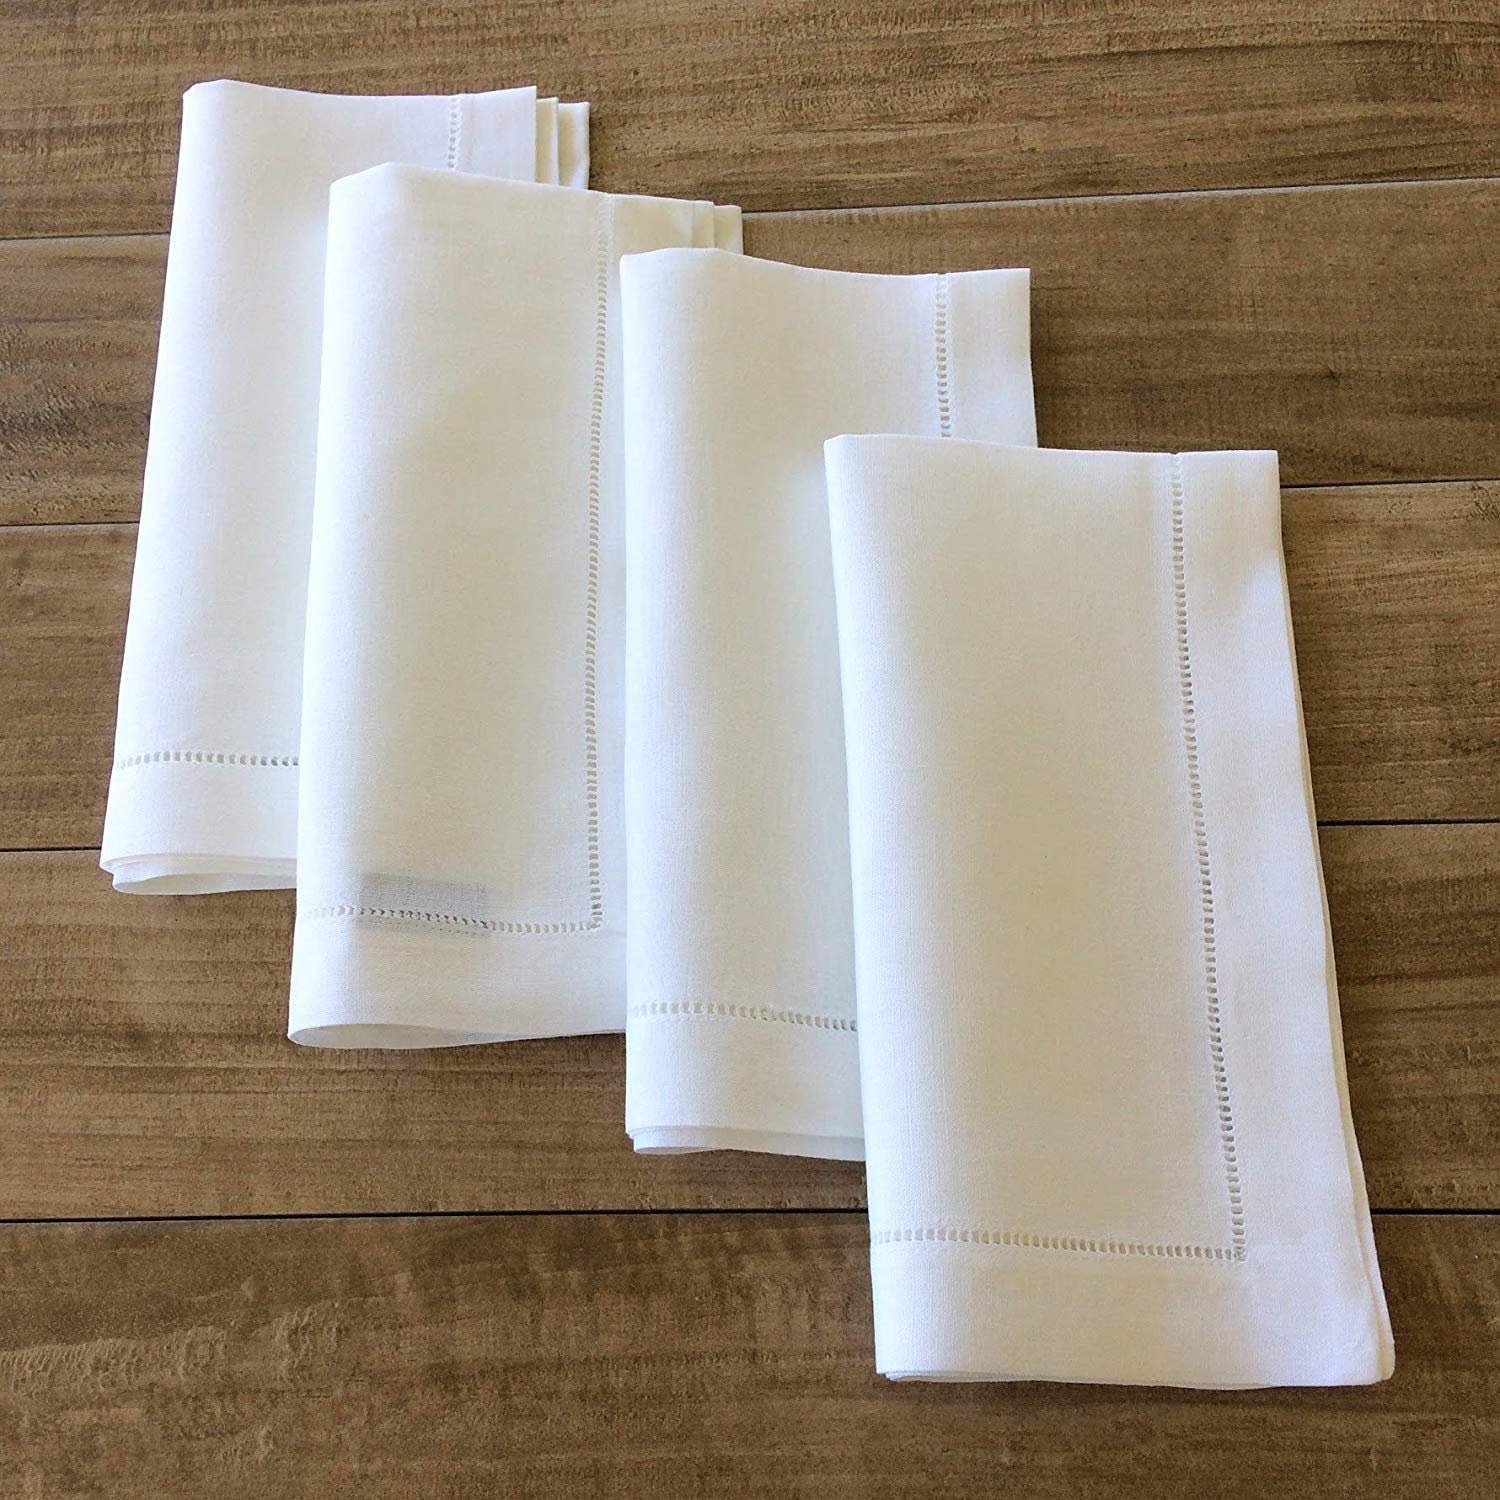 LinenBerry Linen Dinner Napkins 20x20 Inch - Hemstitched Linen Napkins Set  of 4-100% Pure Linen Napkins Washable and Reusable (Natural)